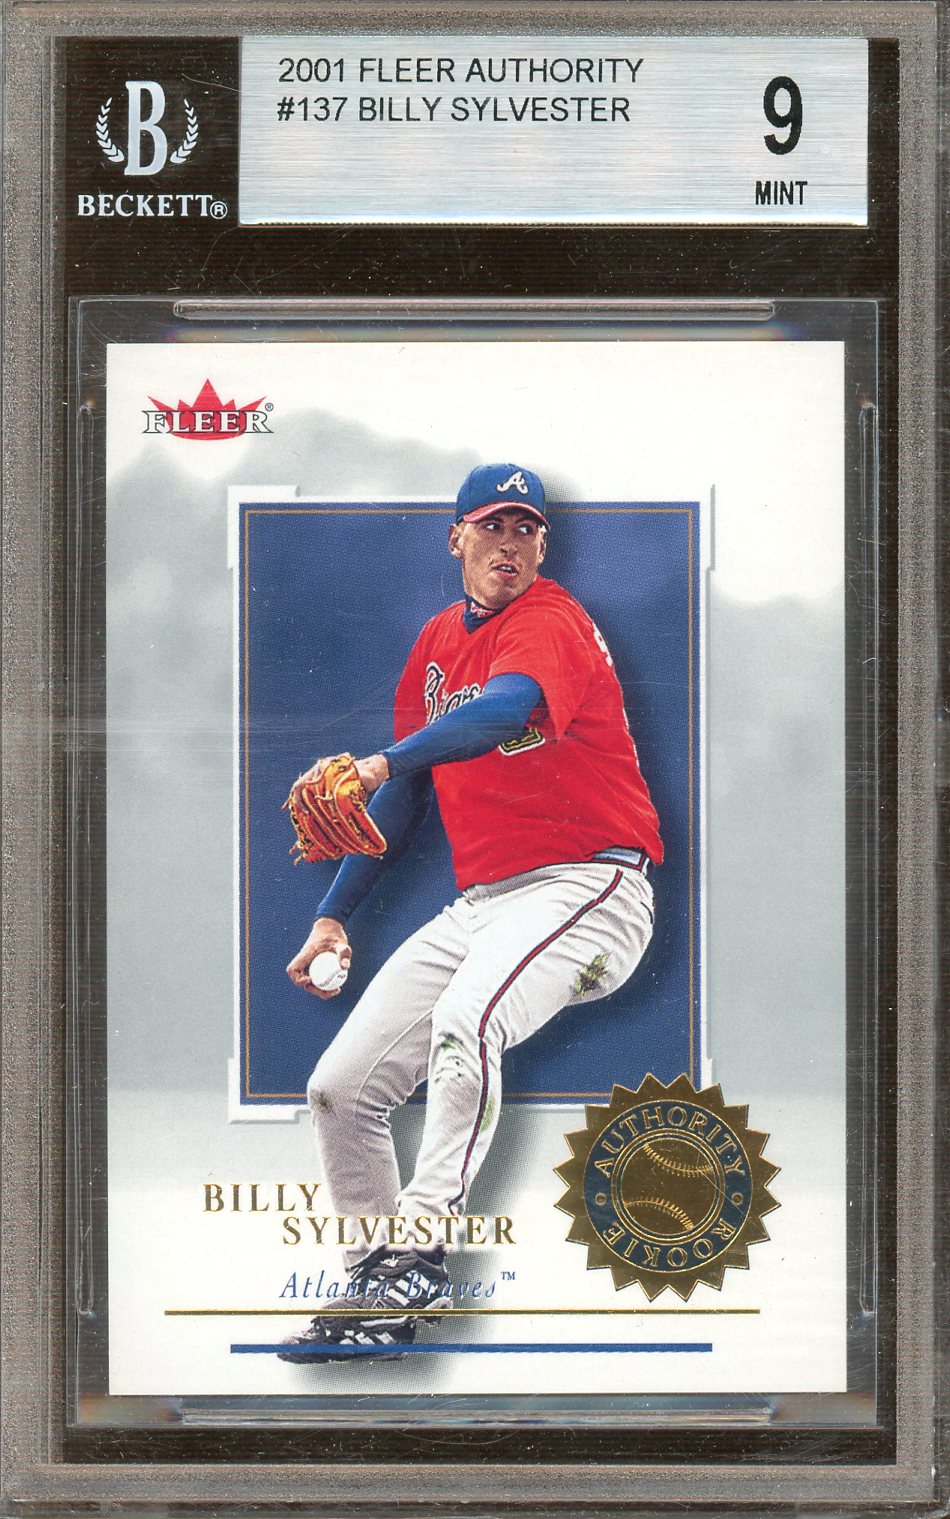 BGS 9 - 2001 Fleer  - Billy Sylvester - Authority Rookie